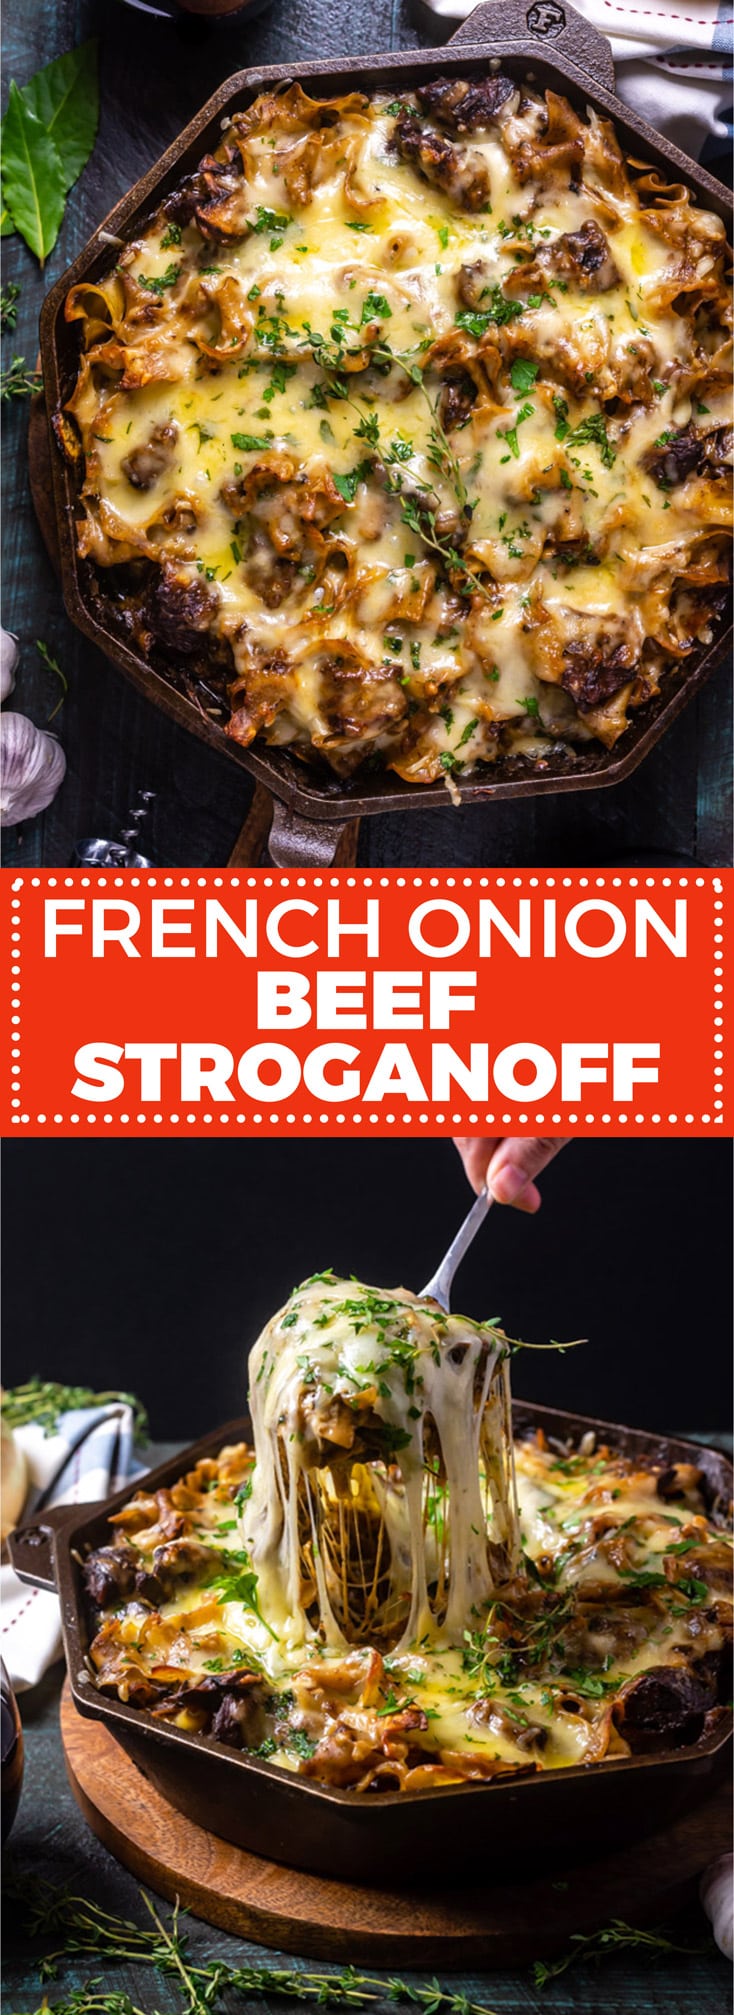 French Onion Beef Stroganoff. This spin on French Onion Soup is hearty, comforting, and perfect for family dinners. It features tender beef steak, caramelized onions, mushrooms (if you like them!), egg noodles, rich beef gravy, and of course, plenty of delicious melted cheese. | hostthetoast.com